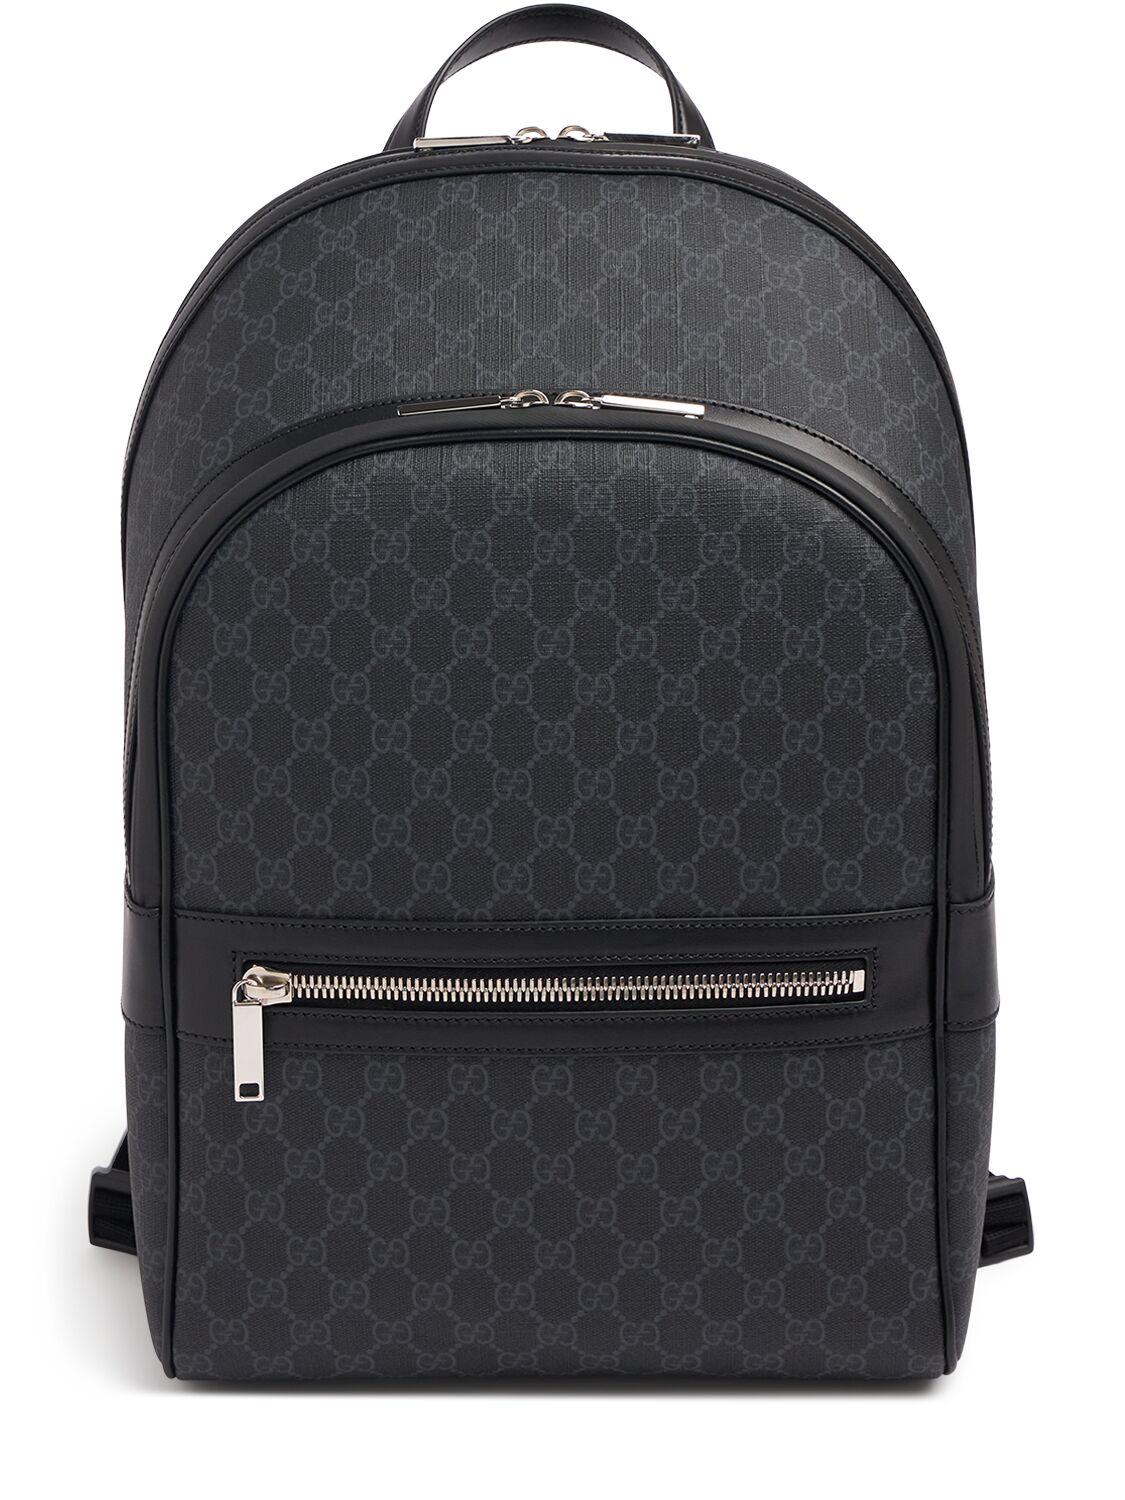 Gucci Backpack In Black